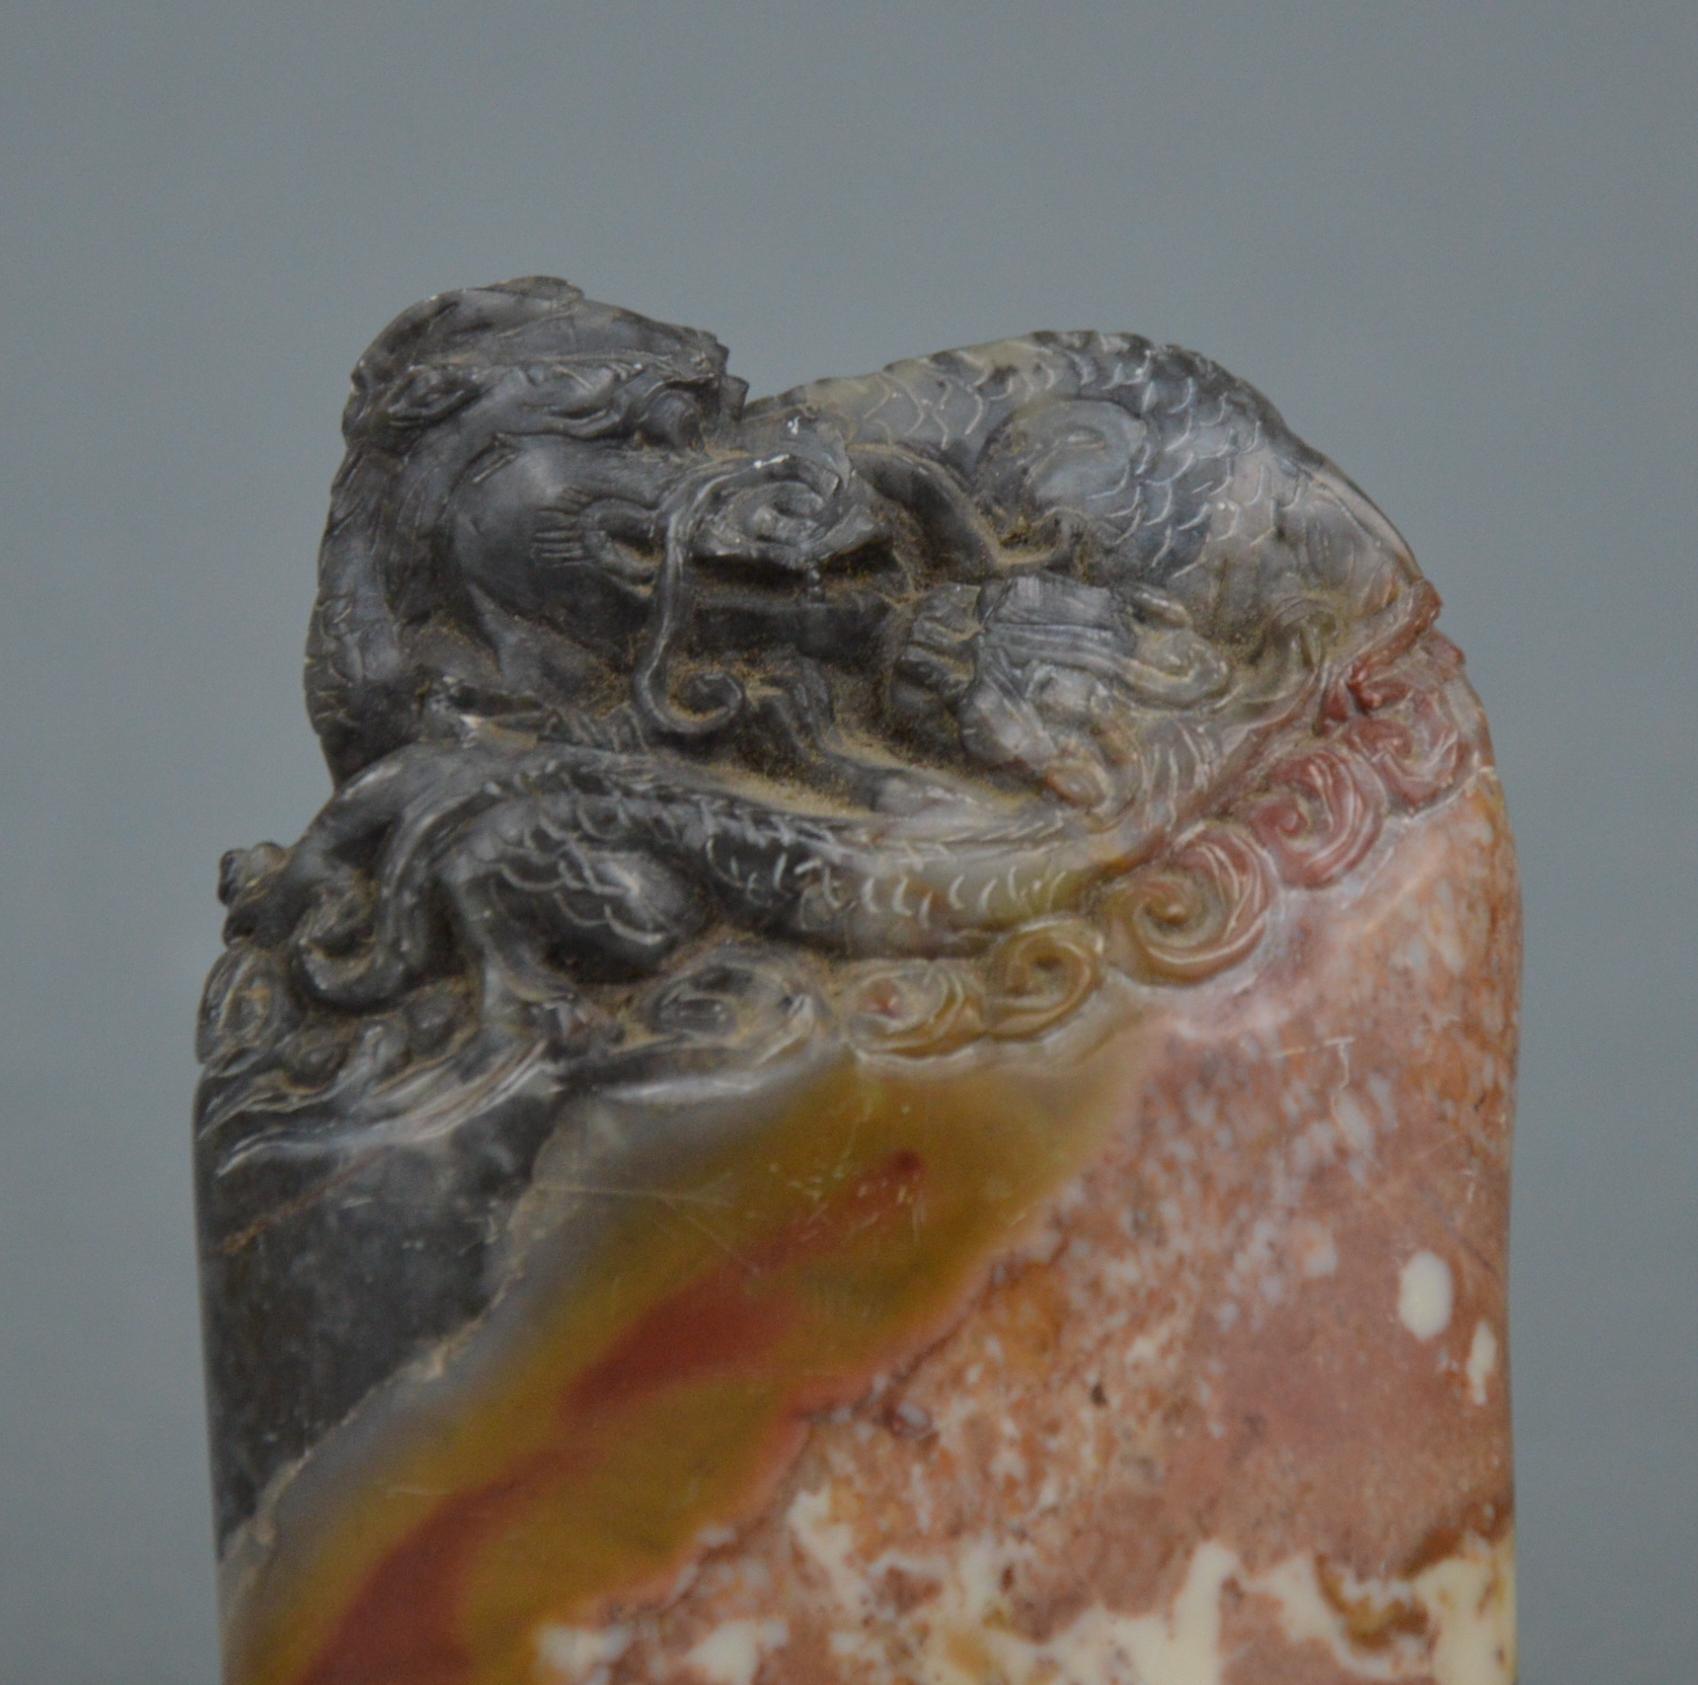 Miniature Chinese sculpture representing a dragon lying on a rock. Made of beautiful three-layered stone.
Dimensions: 8 x 6 x 2.5 cm.